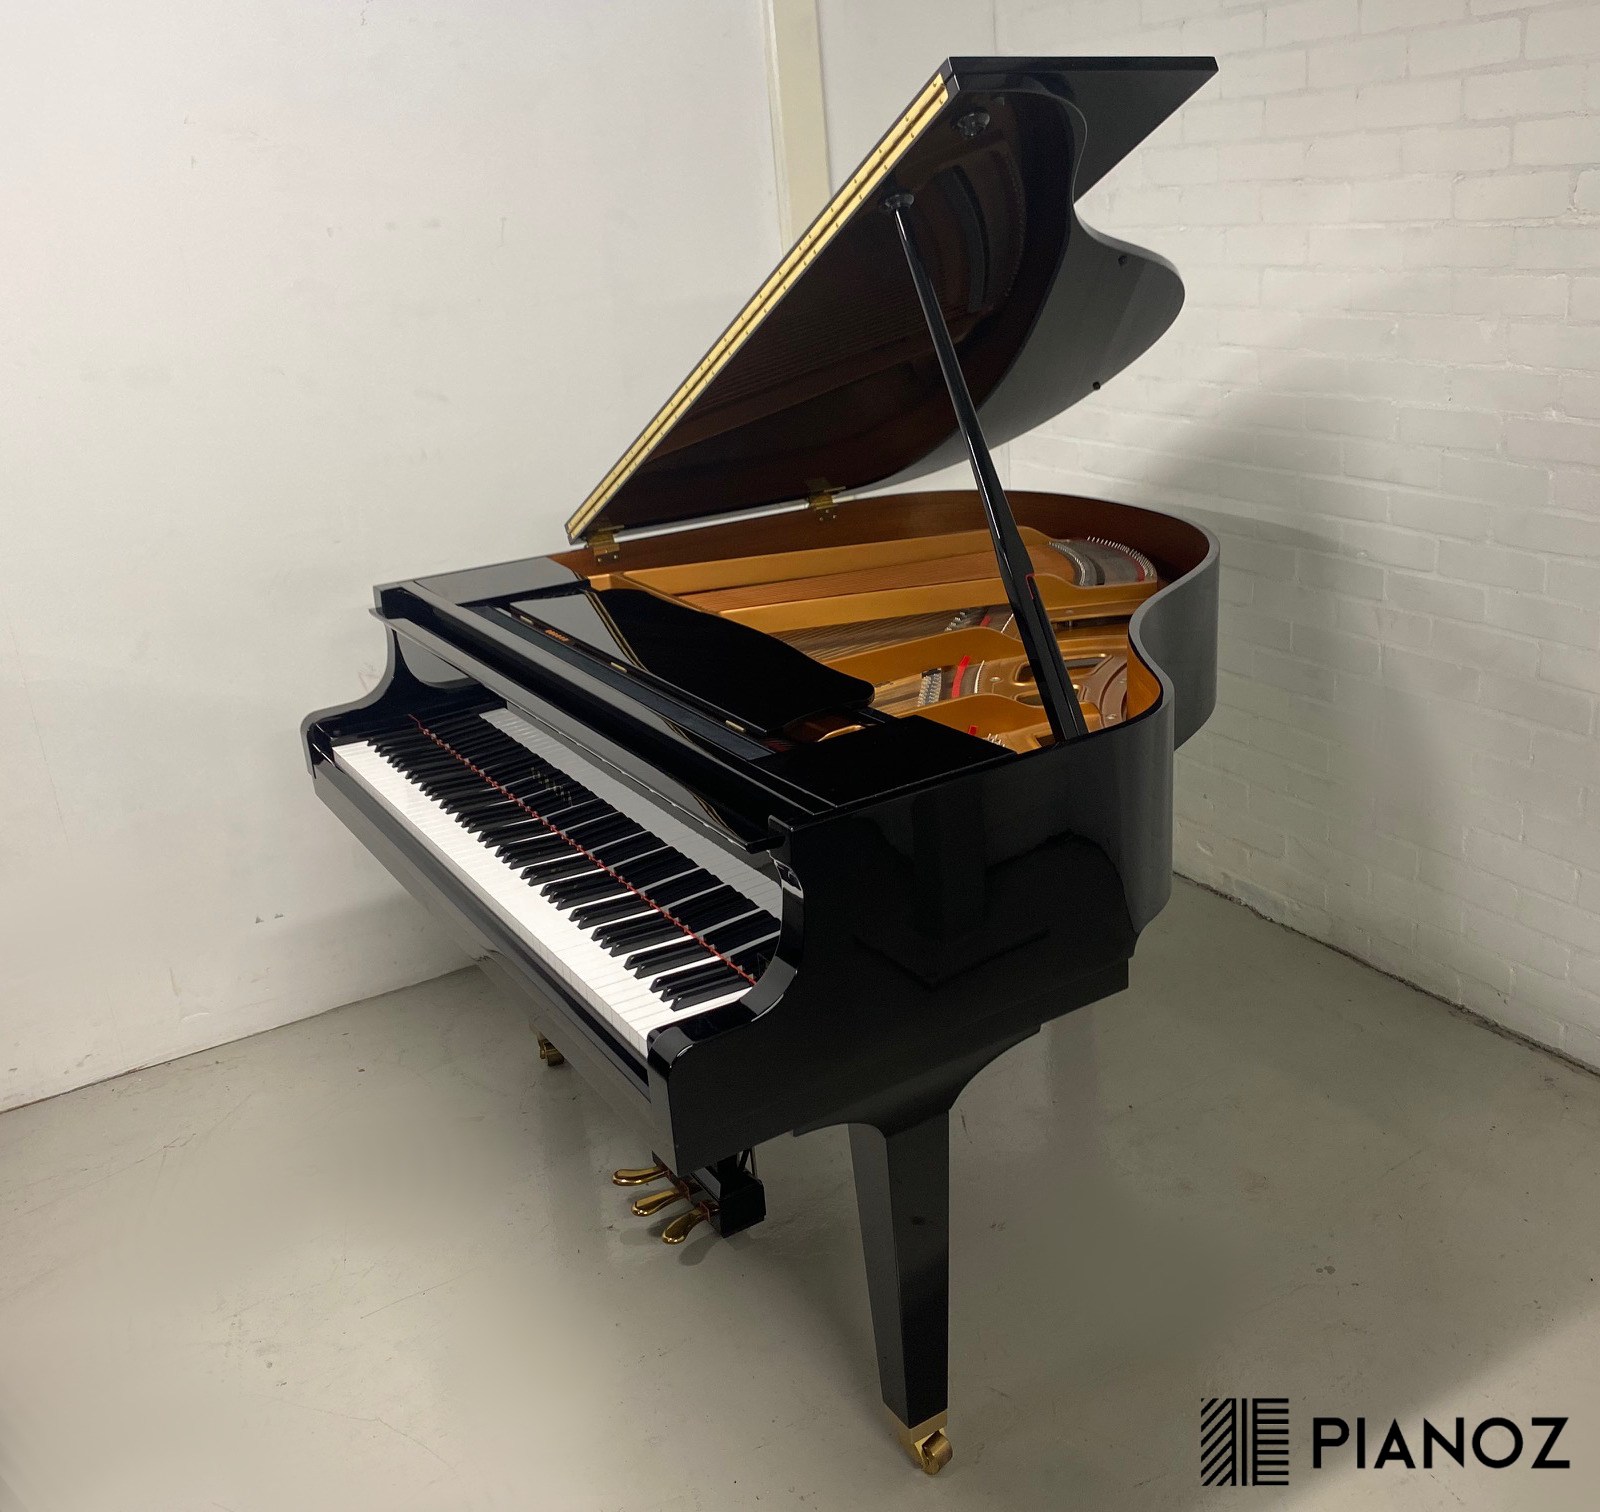 Yamaha GH1 Japanese Baby Grand Piano piano for sale in UK